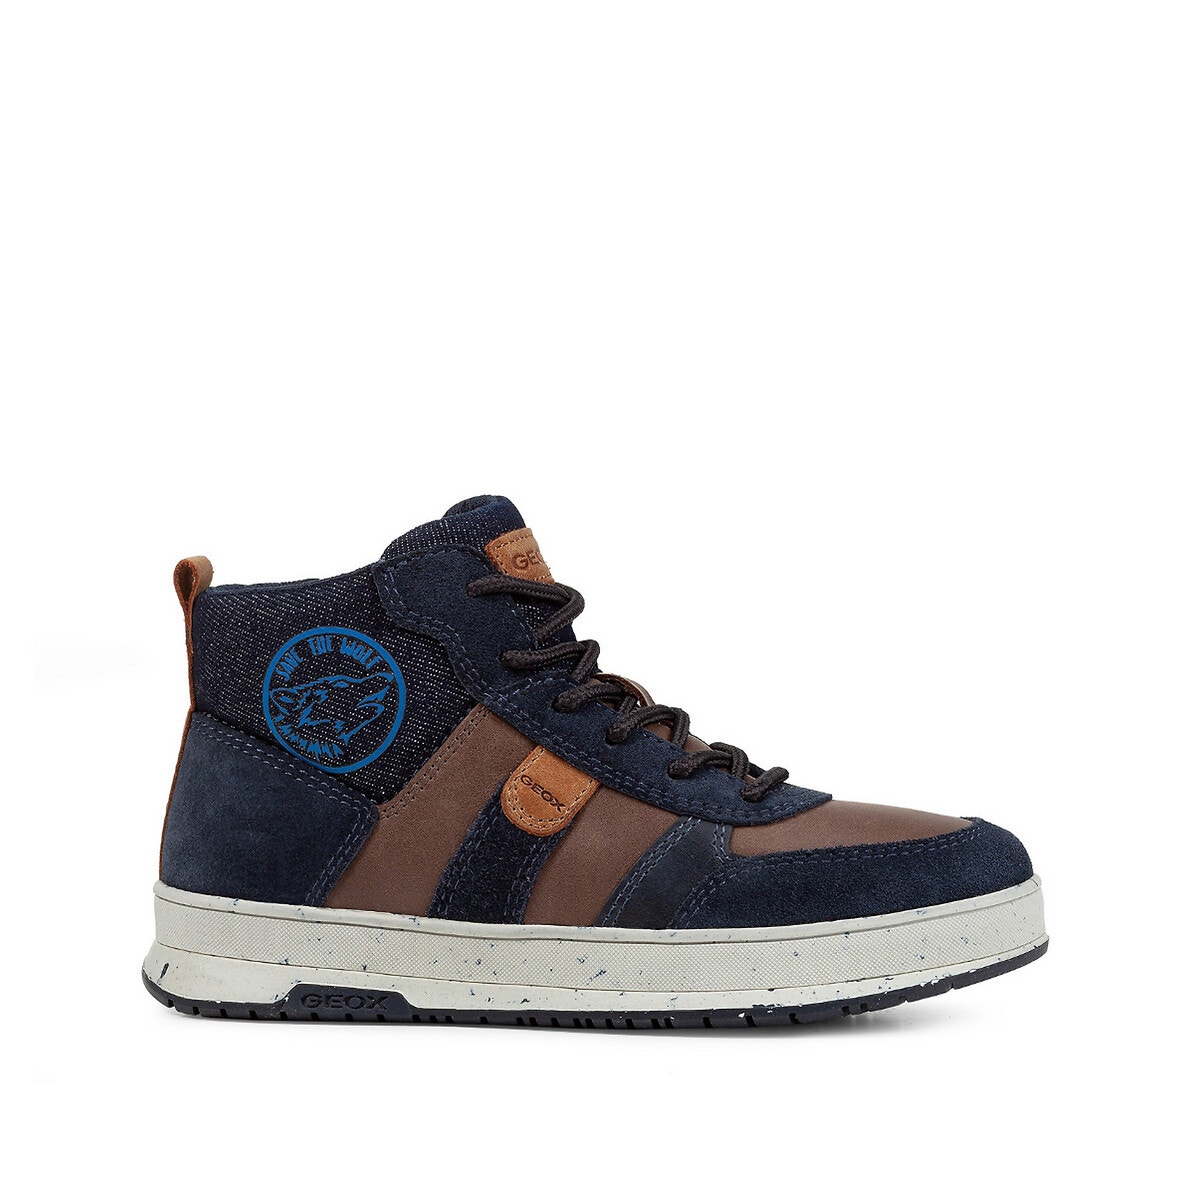 Kids WWF Astuto Trainers in Leather